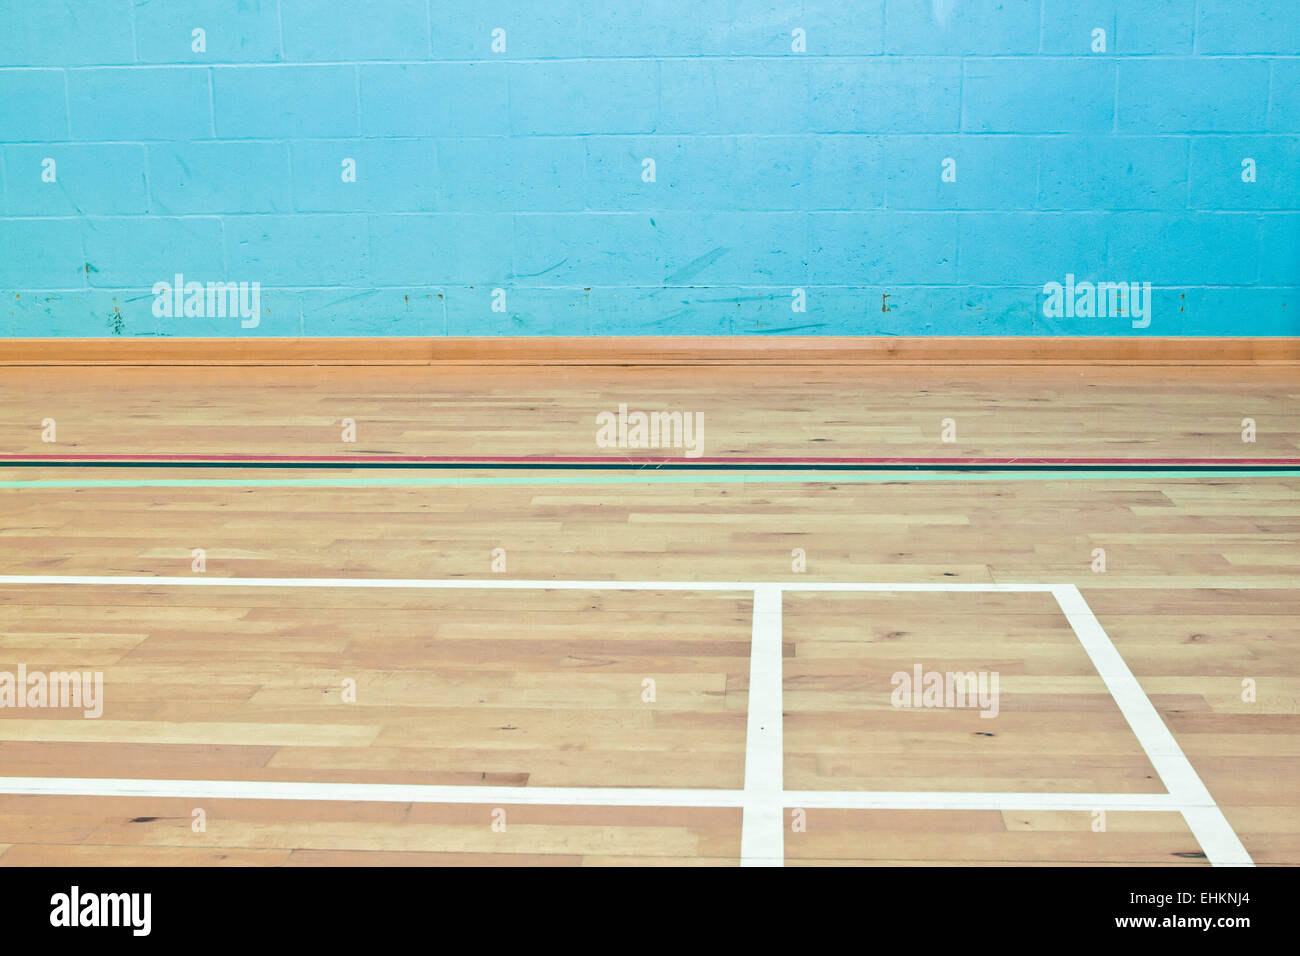 Markings on the wooden floor of a sports hall Stock Photo